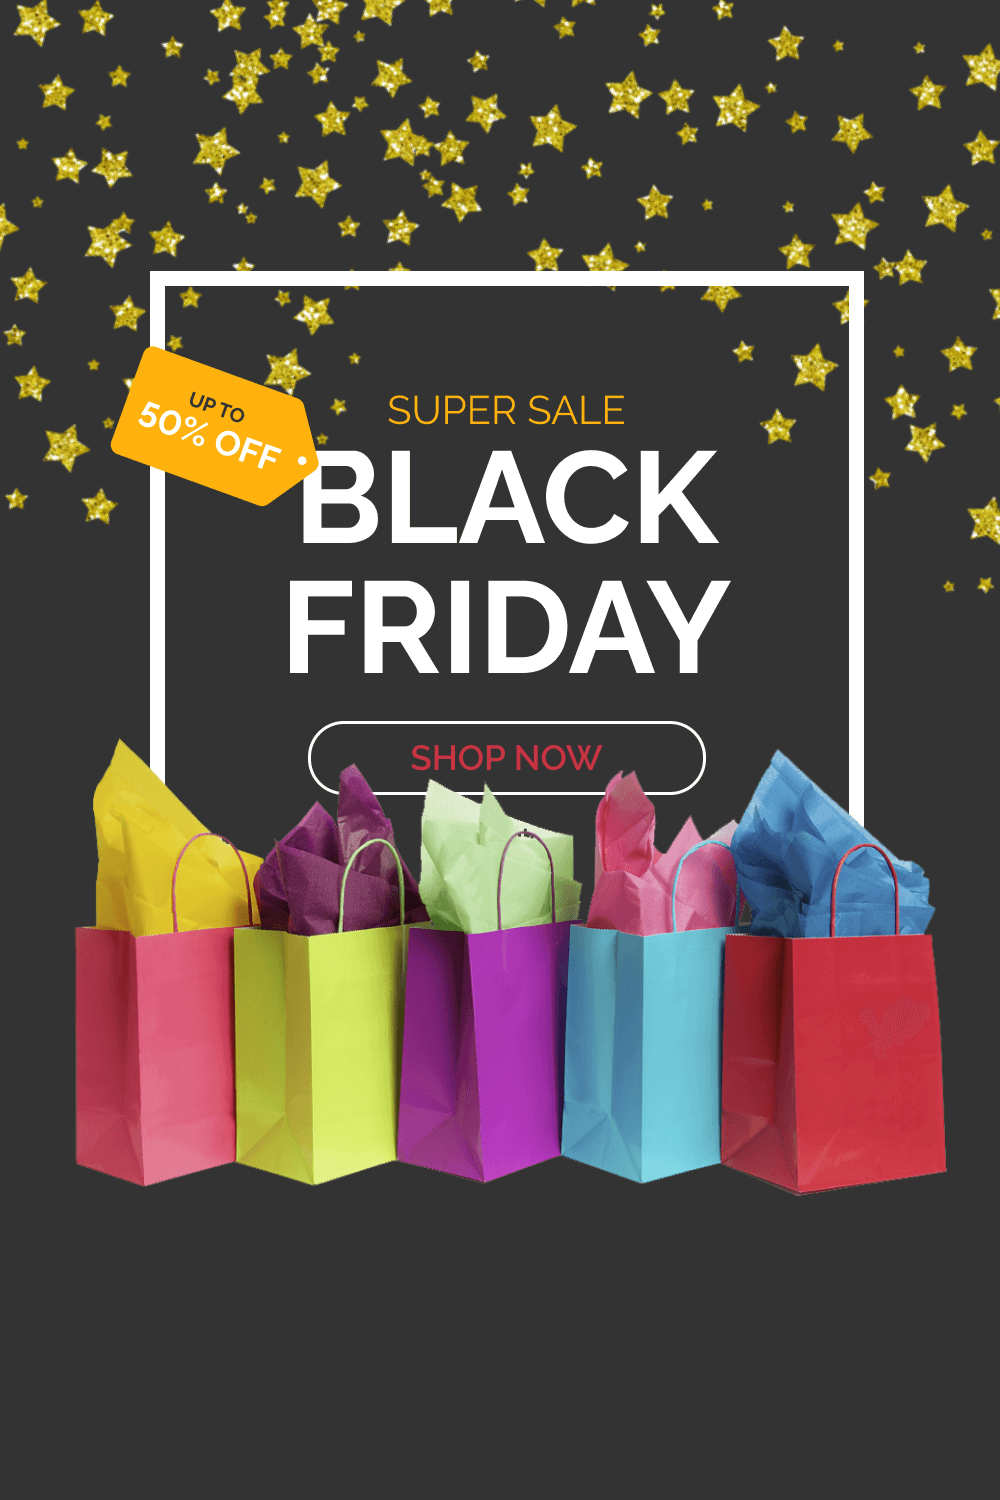 Free Colorful Black Friday Designs pinterest.